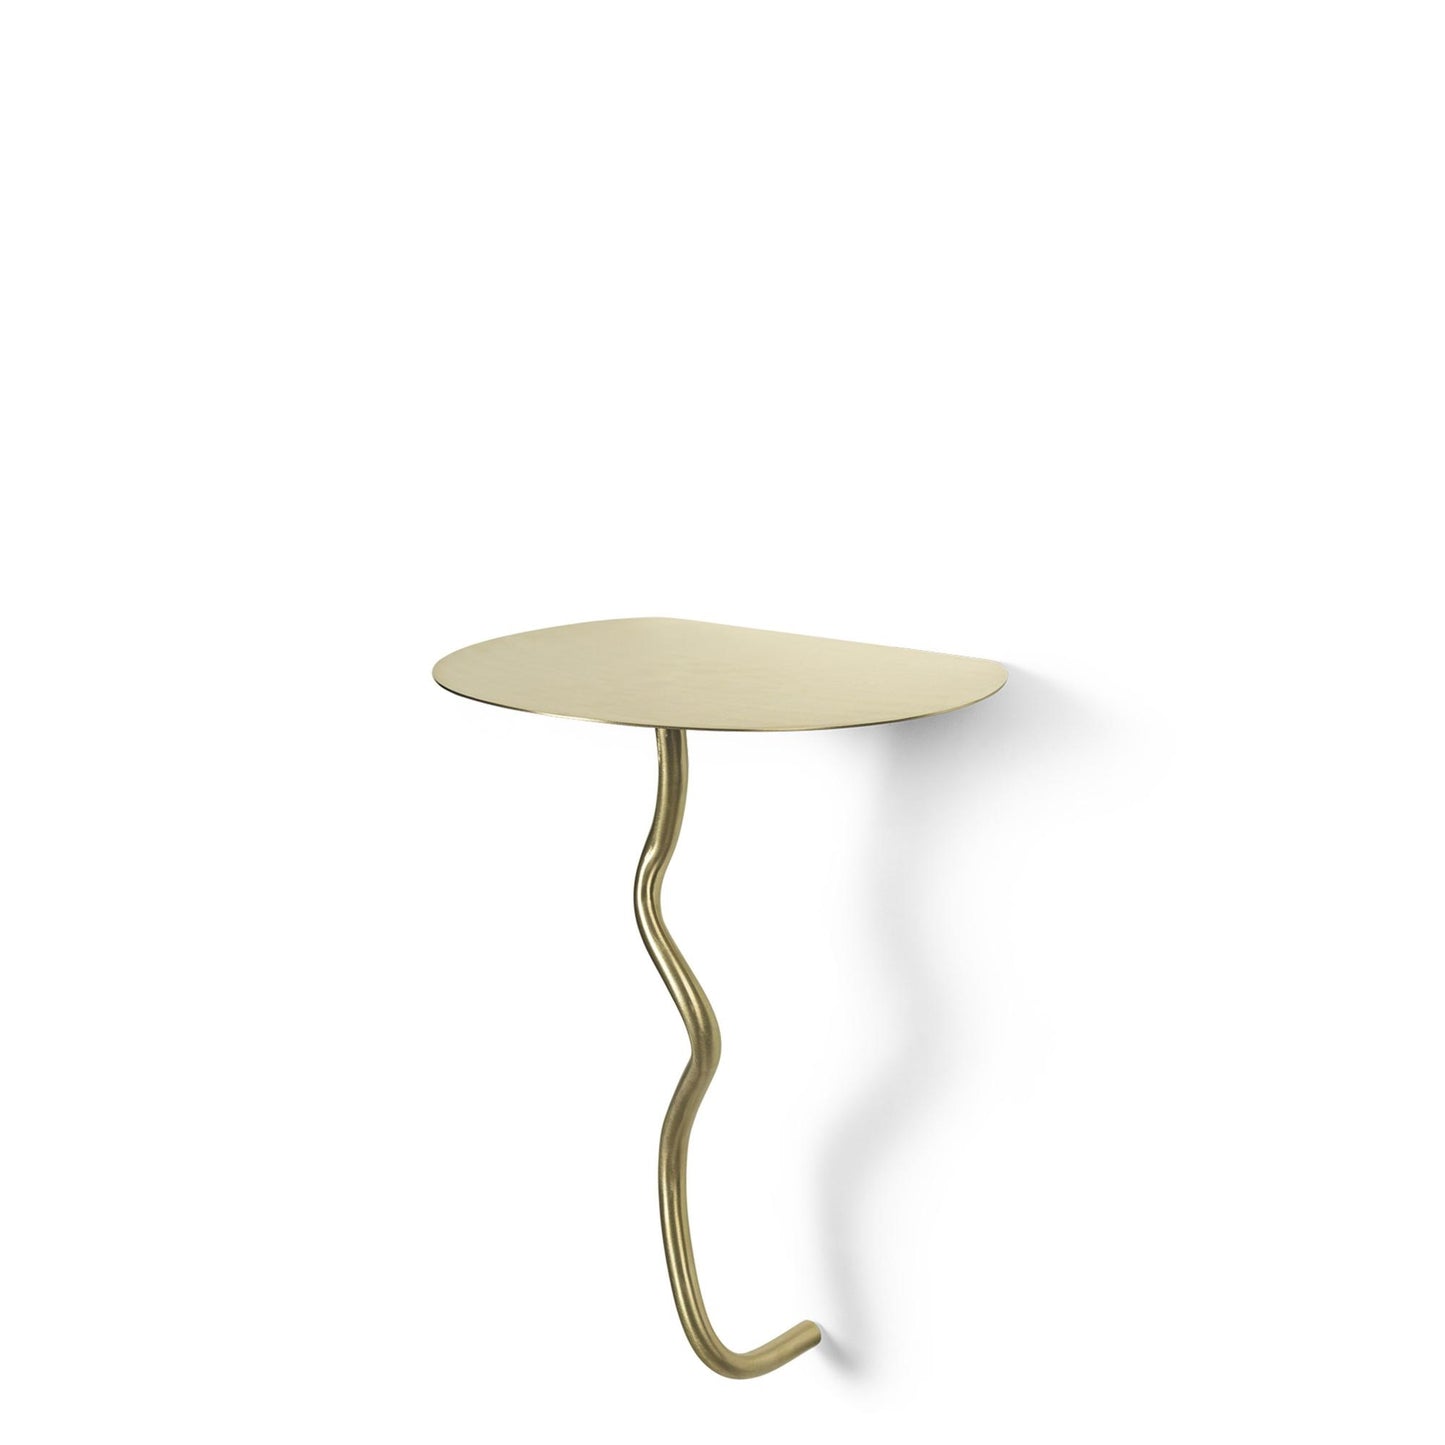 Curvature Wall Table by Ferm Living #Brass